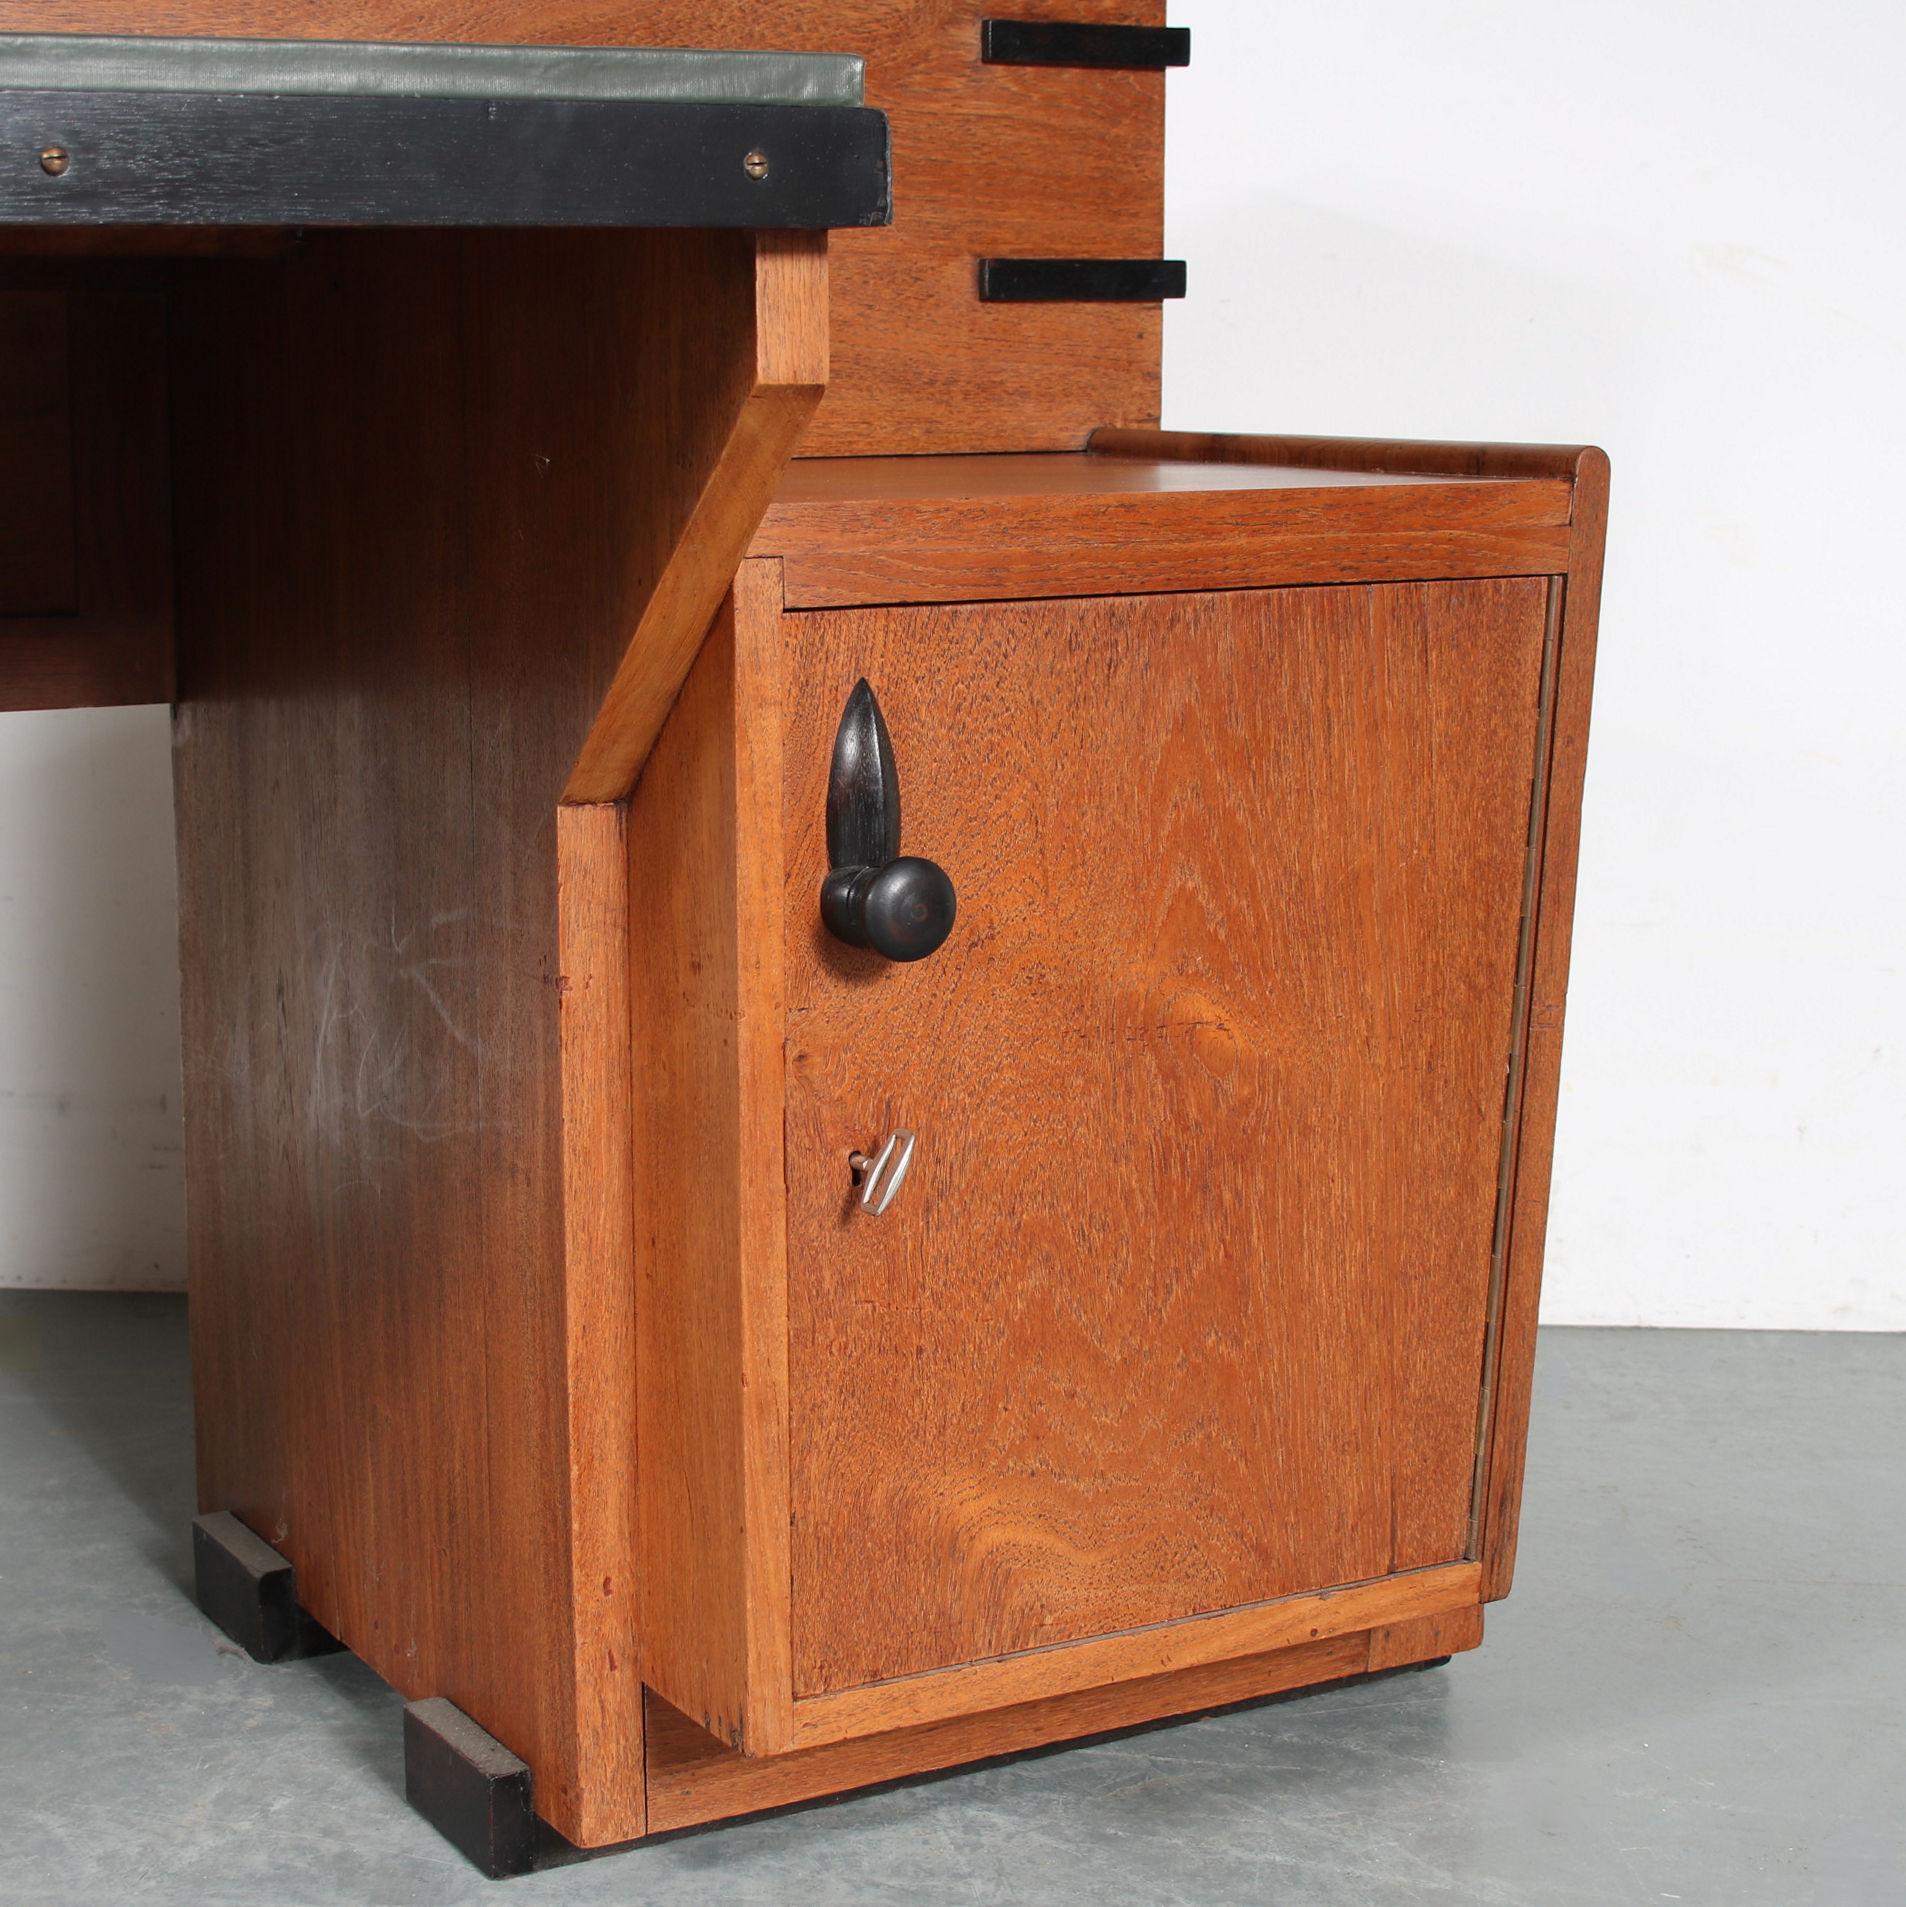 Colonial Haagse School Desk with Stool, Indonesia, 1930 In Good Condition For Sale In Amsterdam, NL